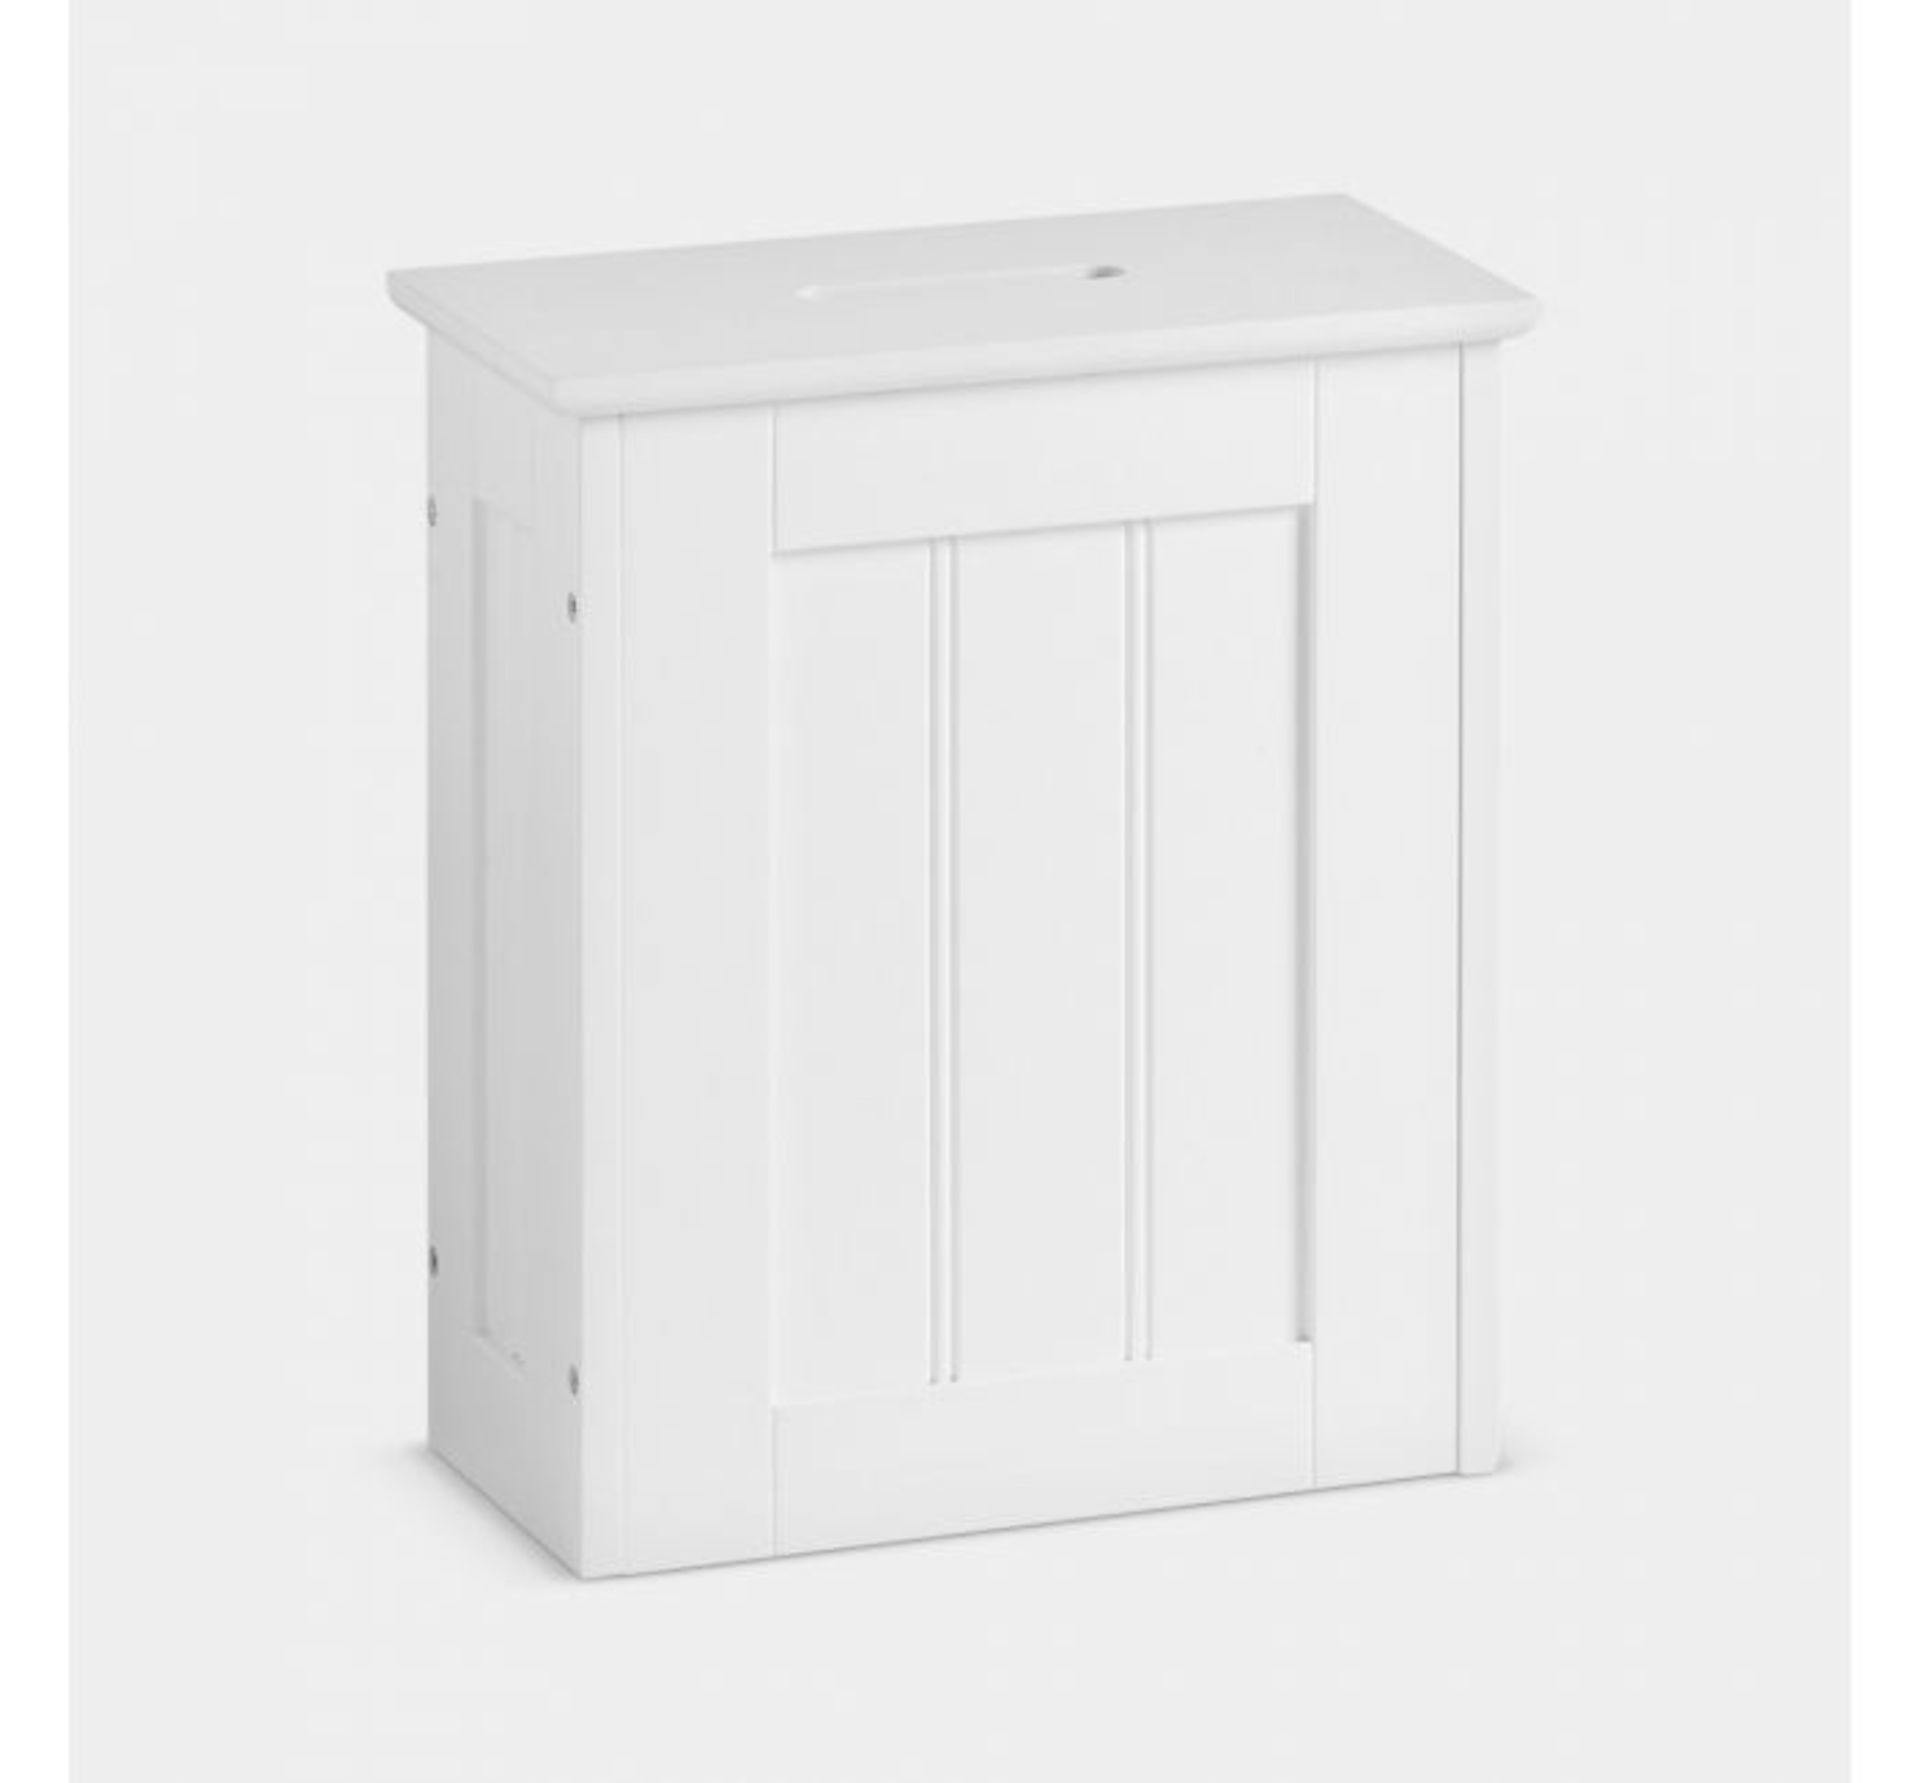 (X30) 1x Colonial Storage Hamper. MDF with painted finish Water-resistant & easy to clean Arrive... - Image 2 of 4